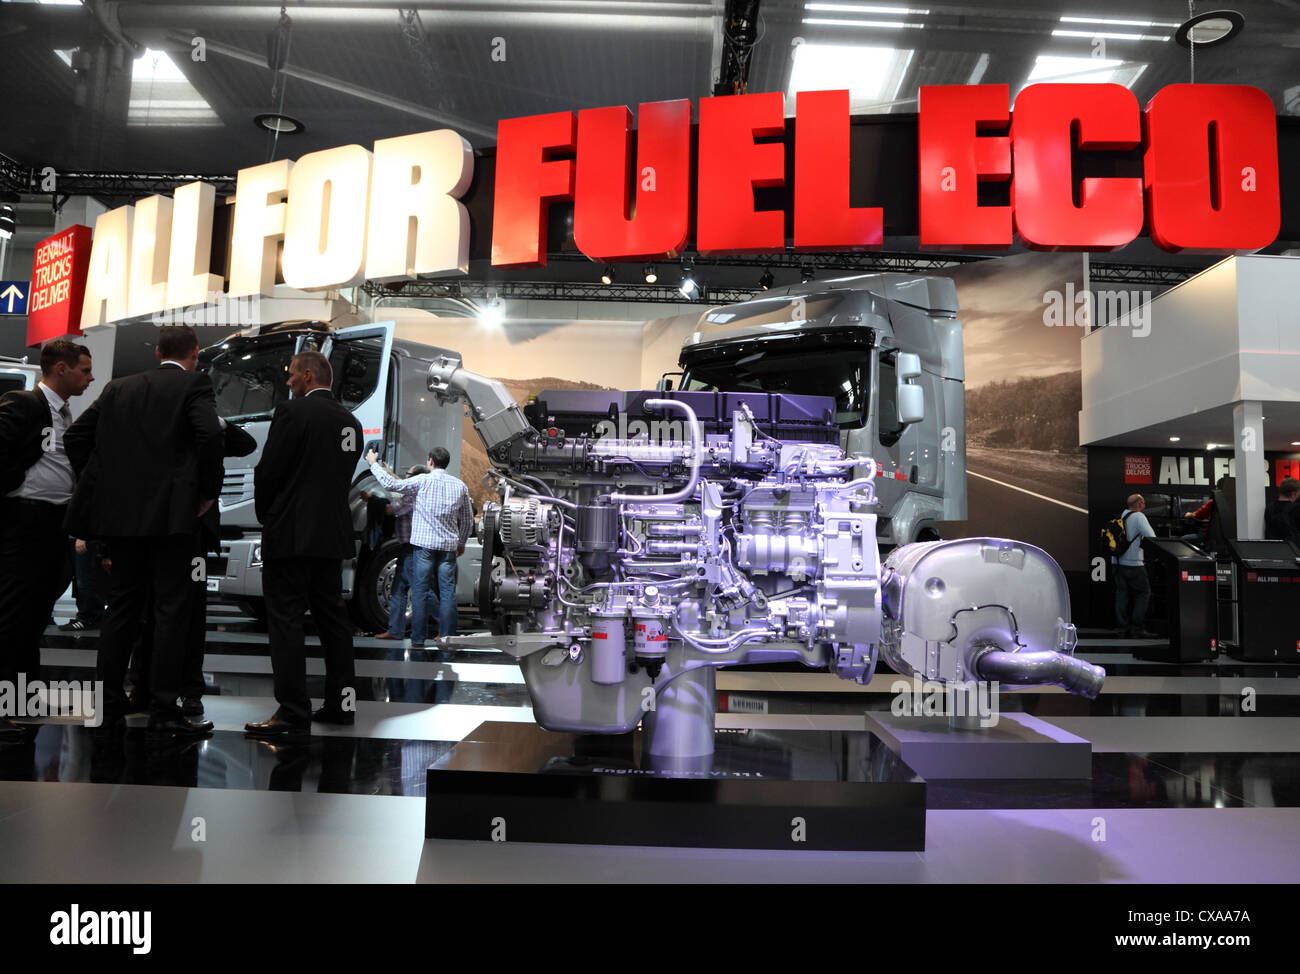 New Renault Truck Engine at the International Motor Show for Commercial Vehicles Stock Photo